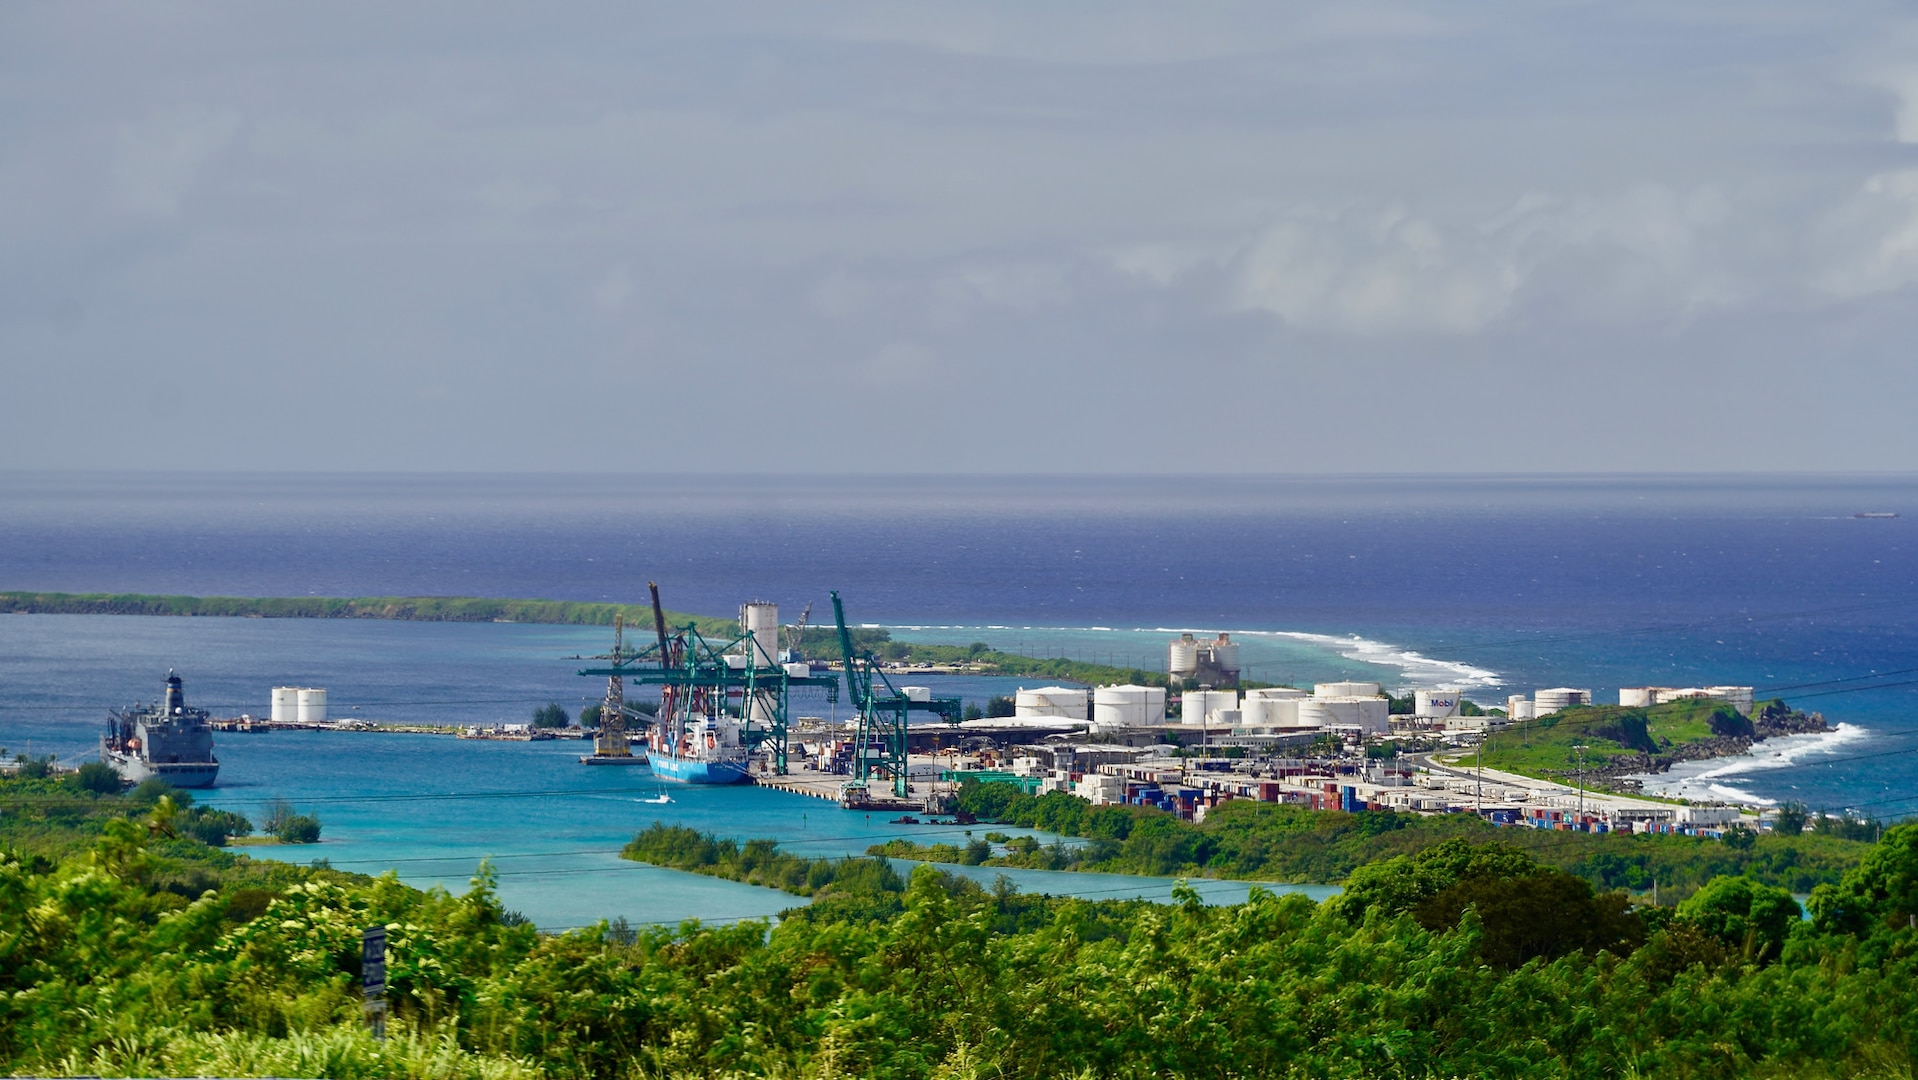 The Port of Guam, as seen from Nimitz Hill on Dec. 13, 2022. The Port of Guam is essential to the security and prosperity of Guam, handling over 1 million tons of cargo and over 300 vessels in 2022. (U.S. Coast Guard photo by Chief Warrant Officer Sara Muir)